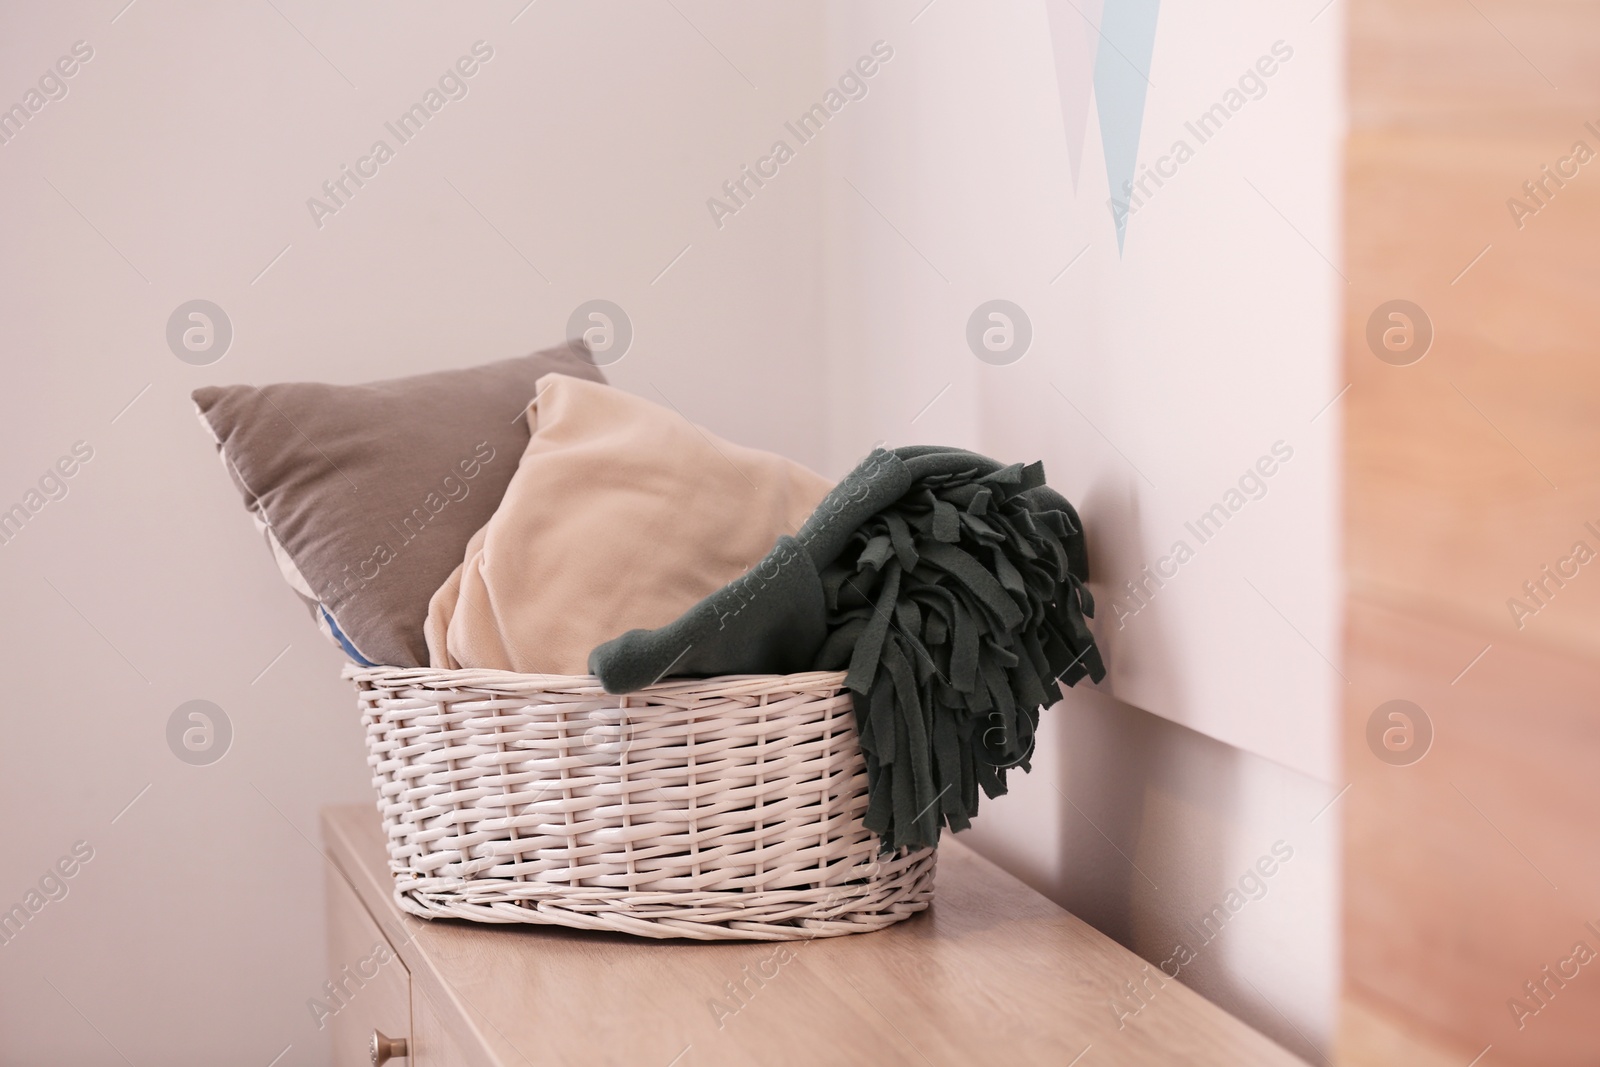 Photo of Basket with blankets and pillow on commode indoors